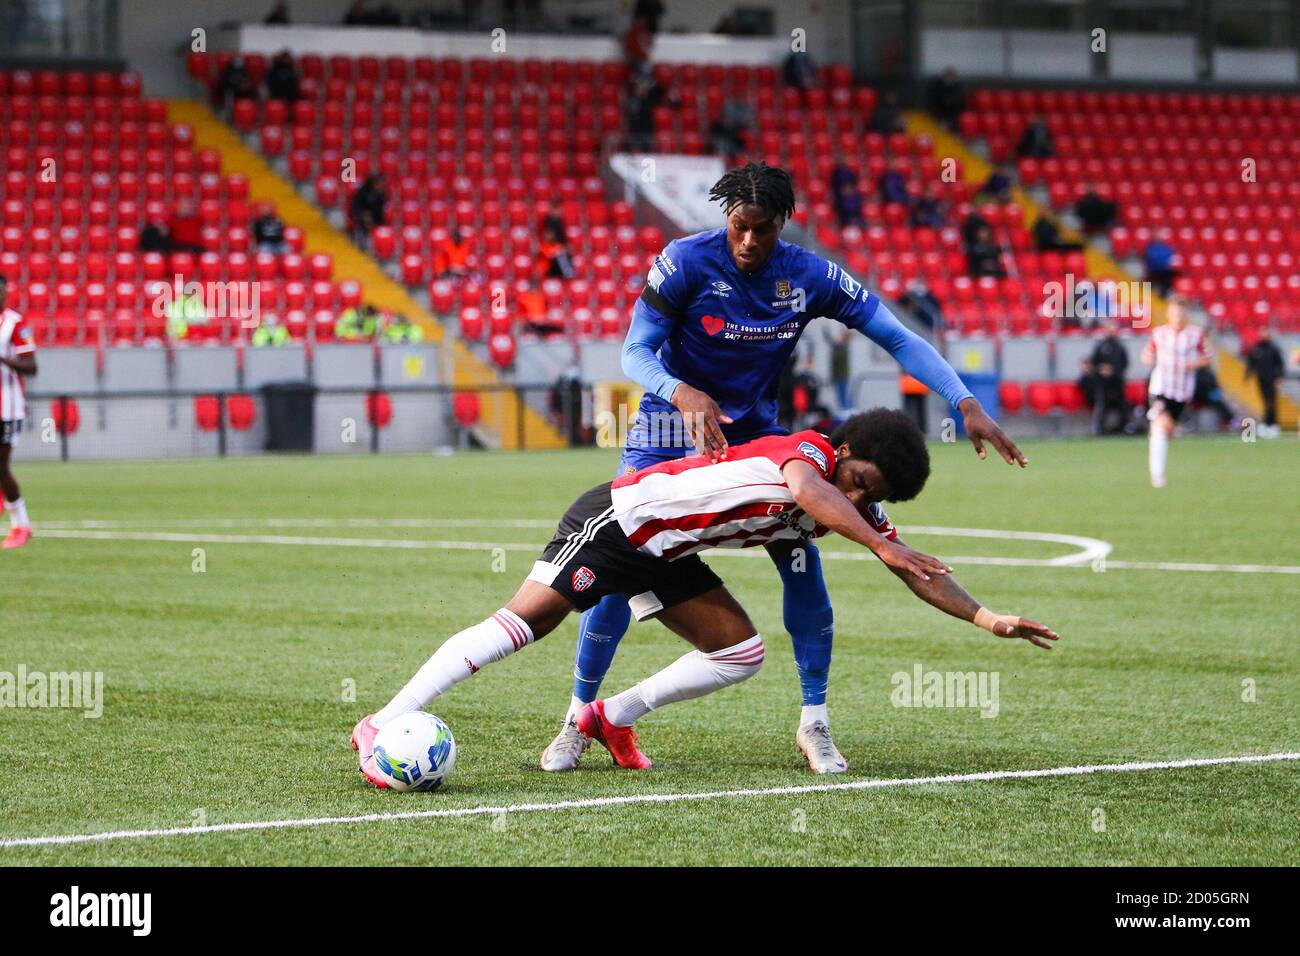 WALTER FIGUEIRA (Derry City FC) goes to ground in the penalty area after Sobowale (Waterford) makes contact   during the Airtricity League fixture bet Stock Photo